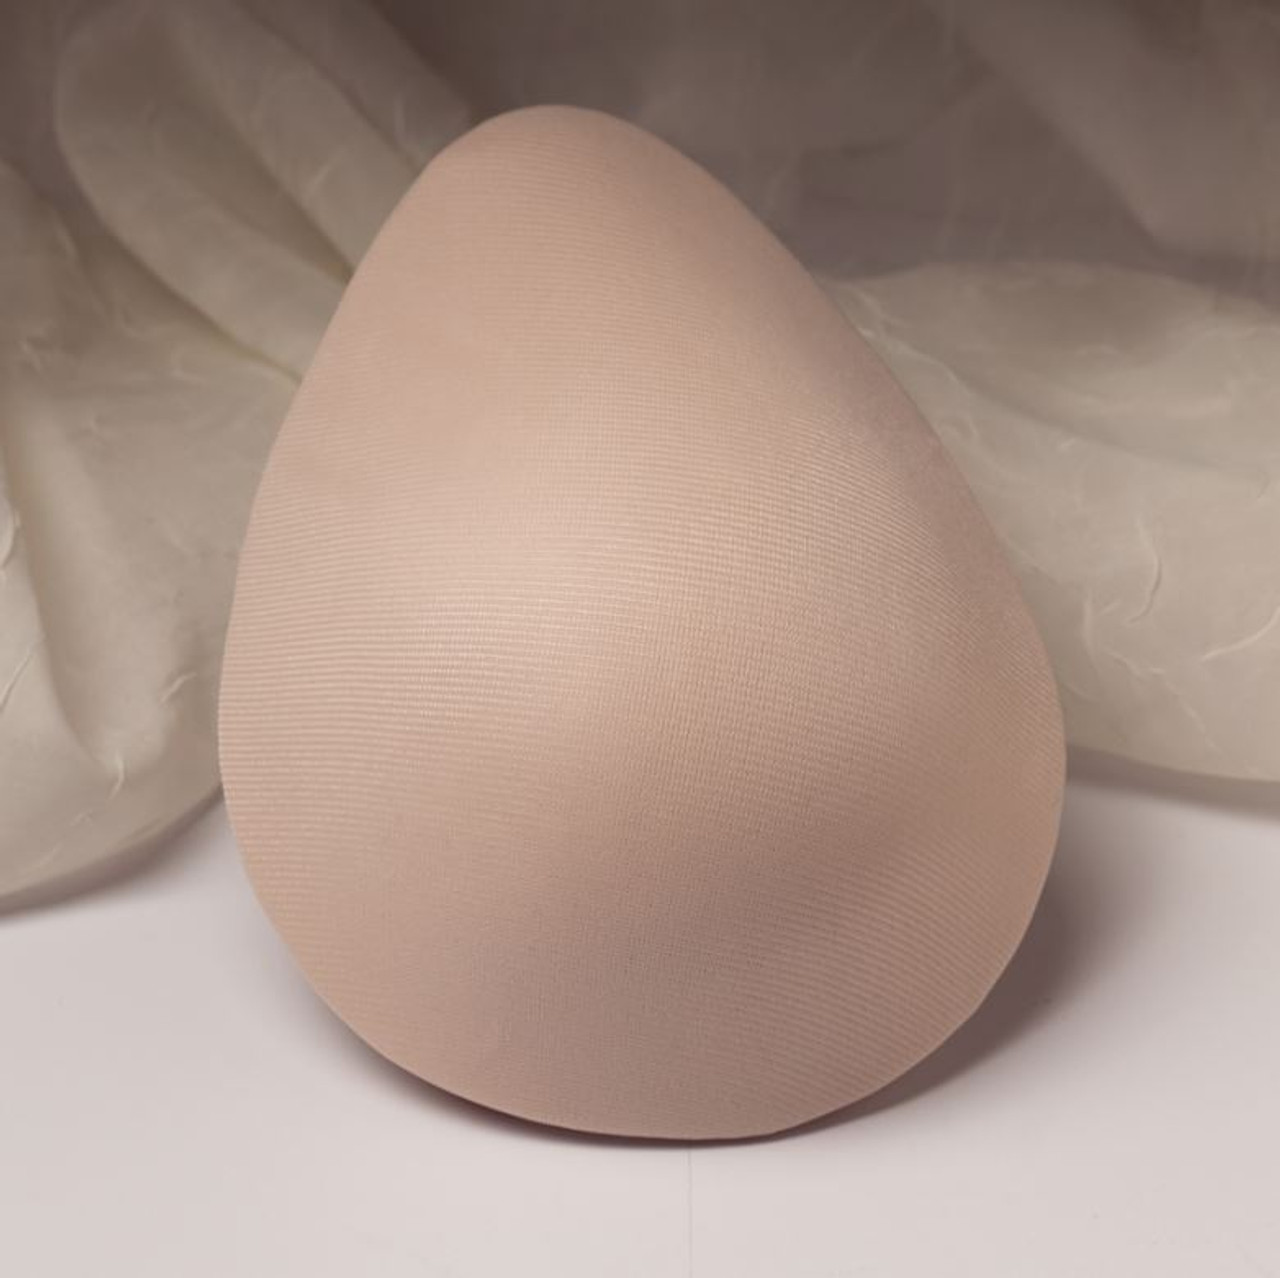 Neraly Me- Oval Foam Breast Prosthesis for Post Surgery, Syle430